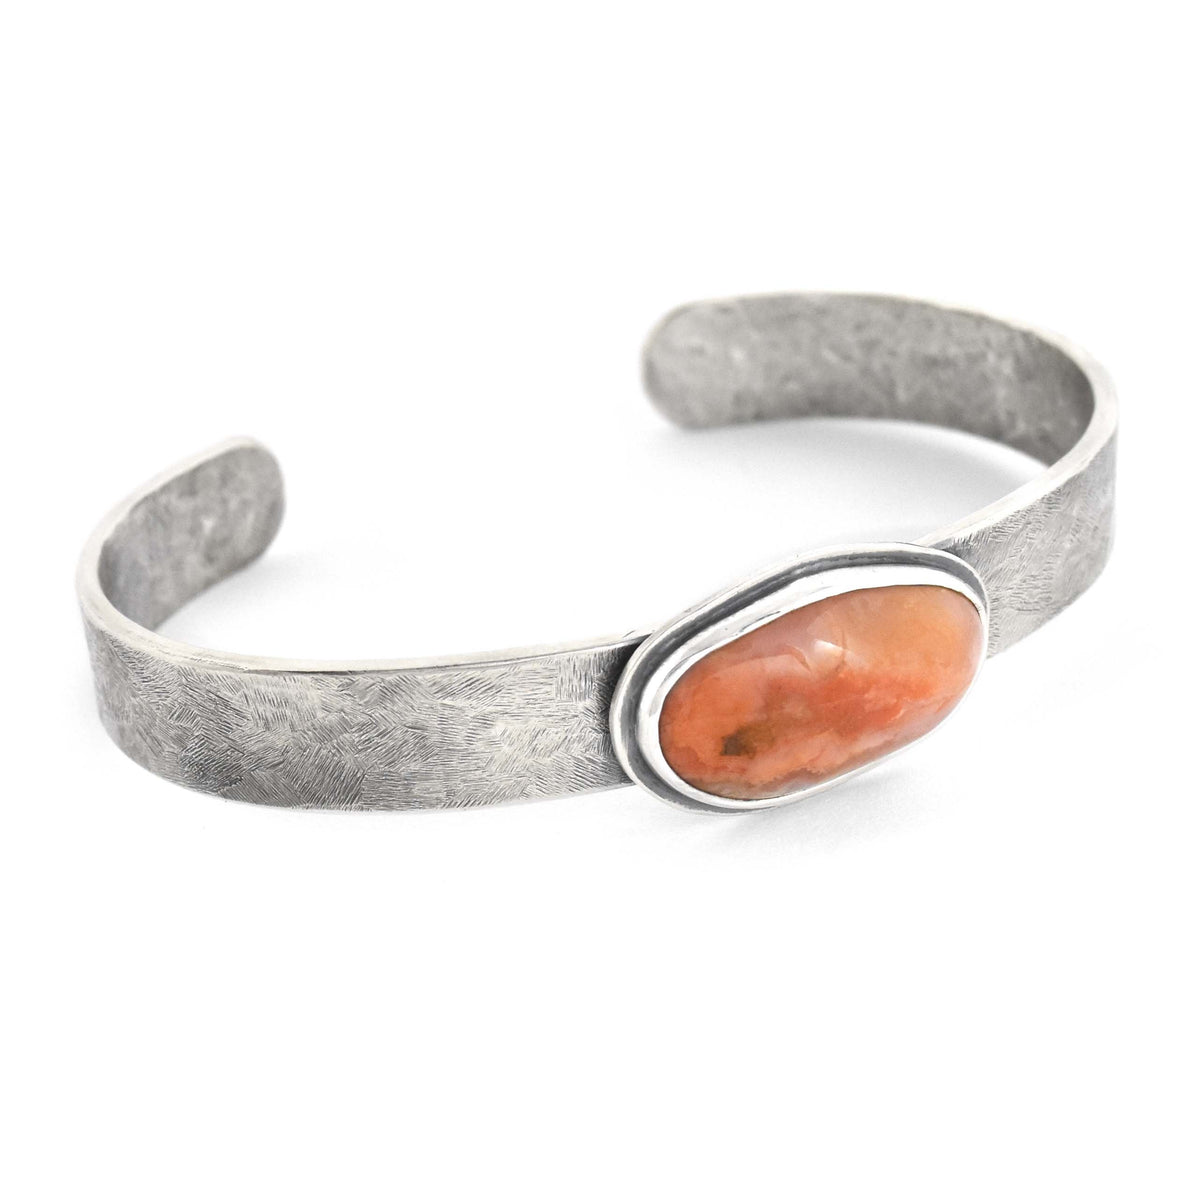 Lake Superior Agate Ring - Choose Your Own Stone